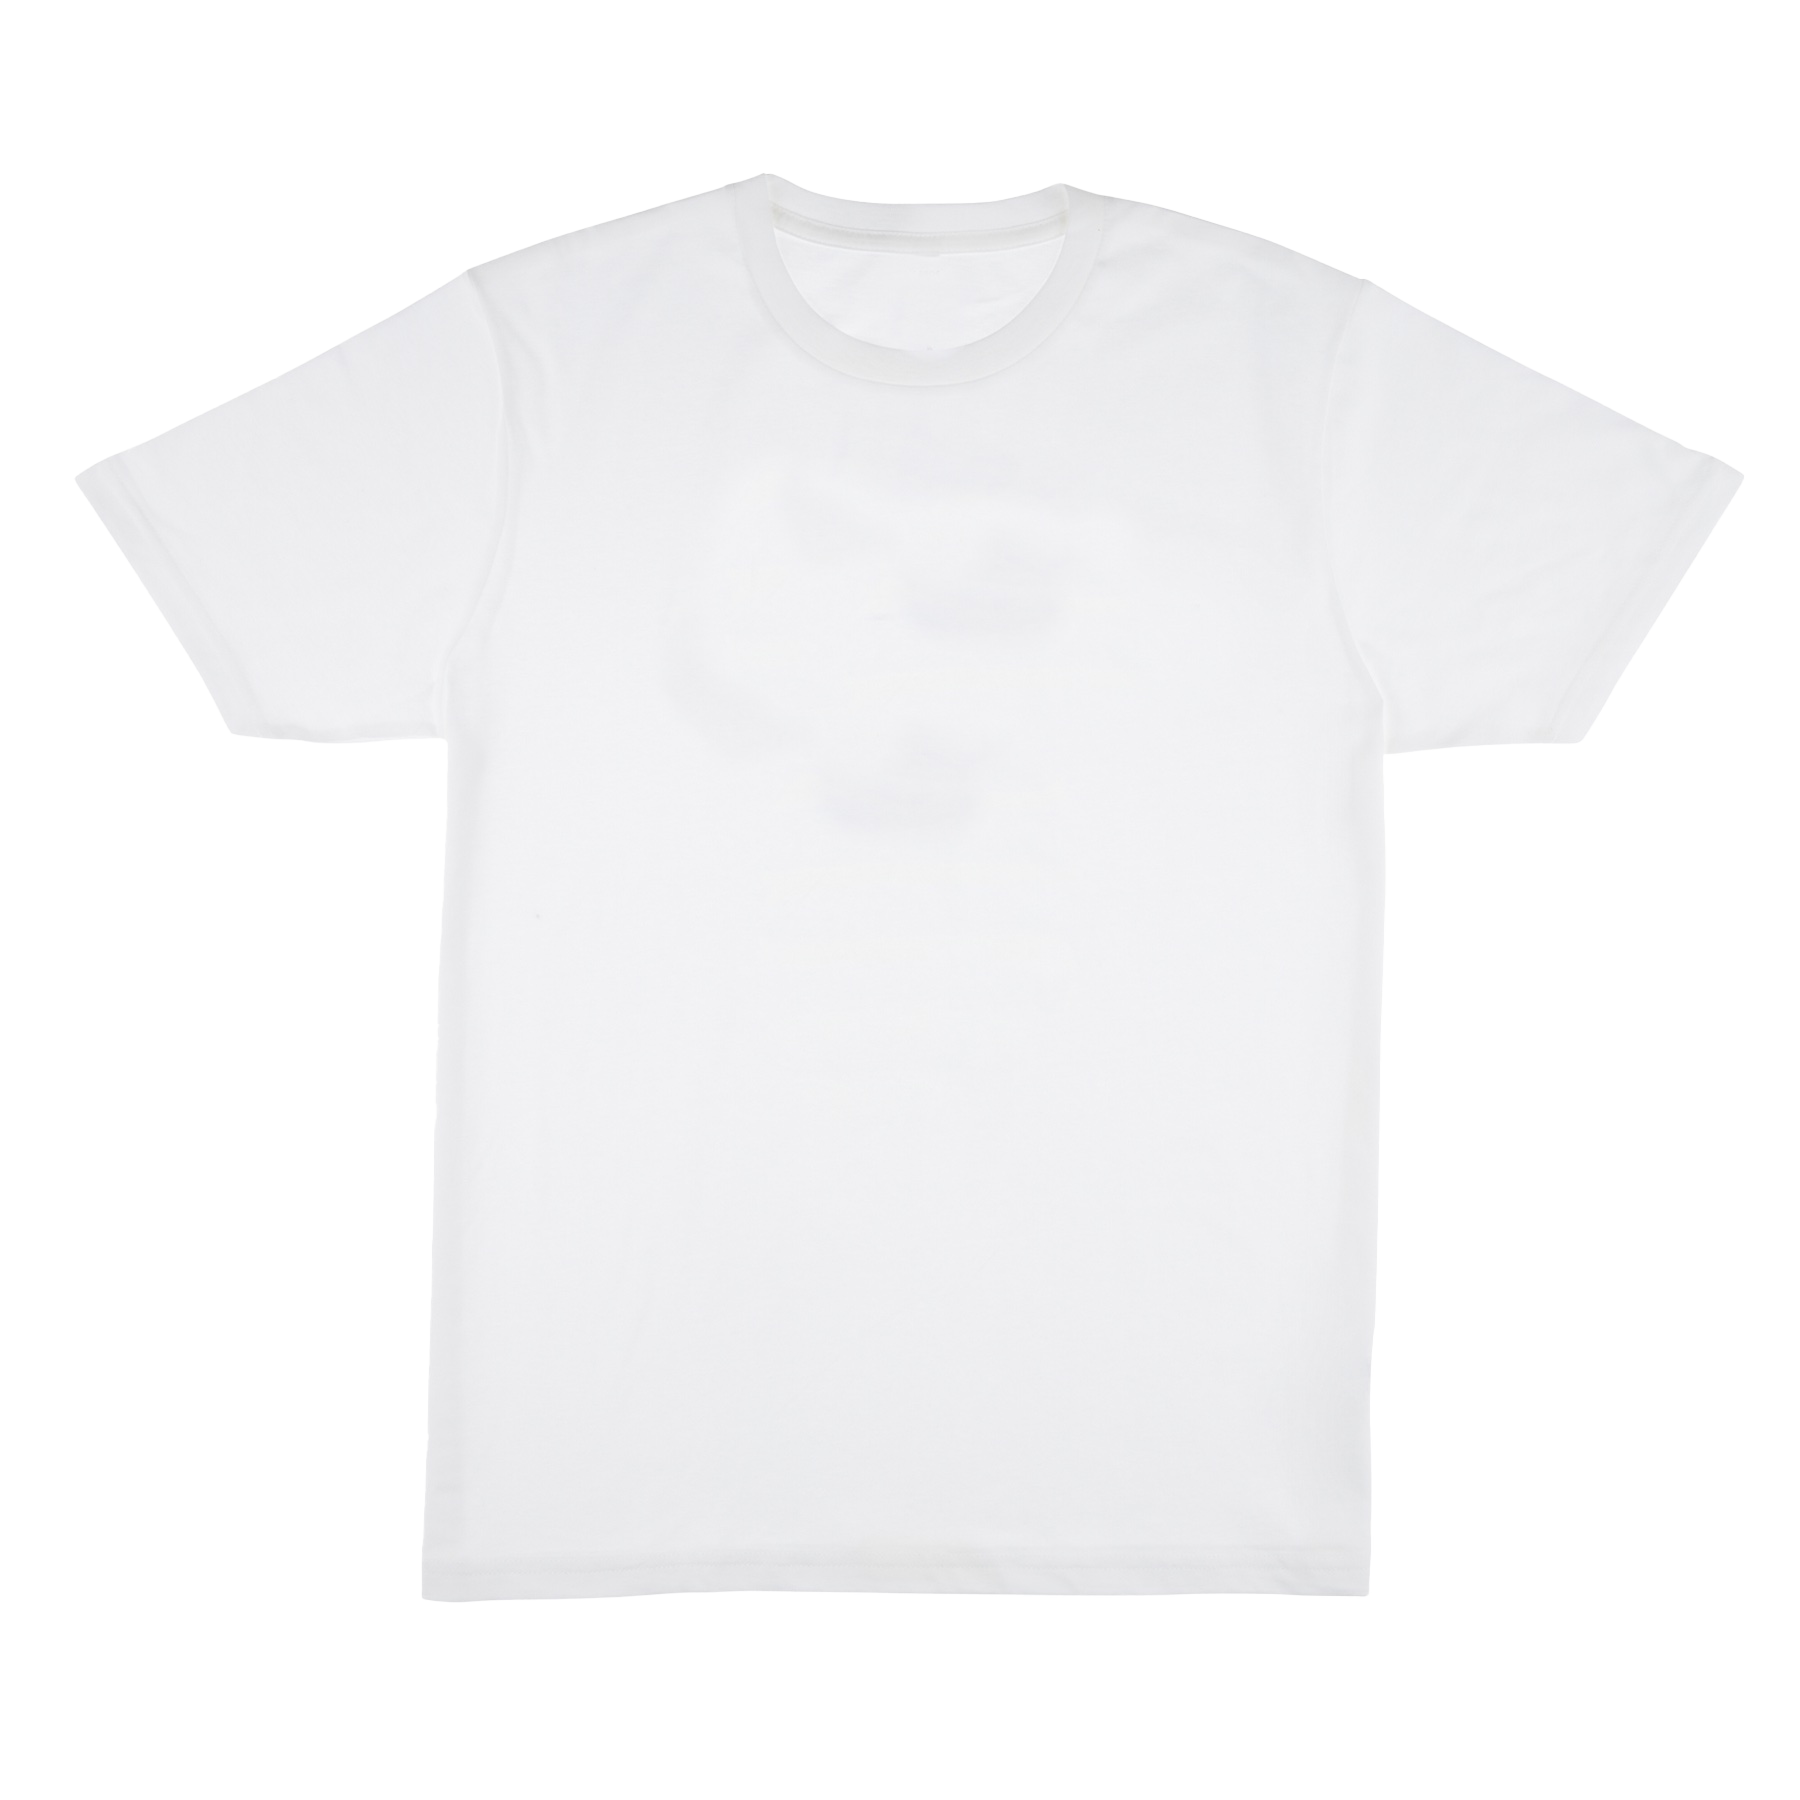 CHAOS - White Chaos T-Shirt with back print